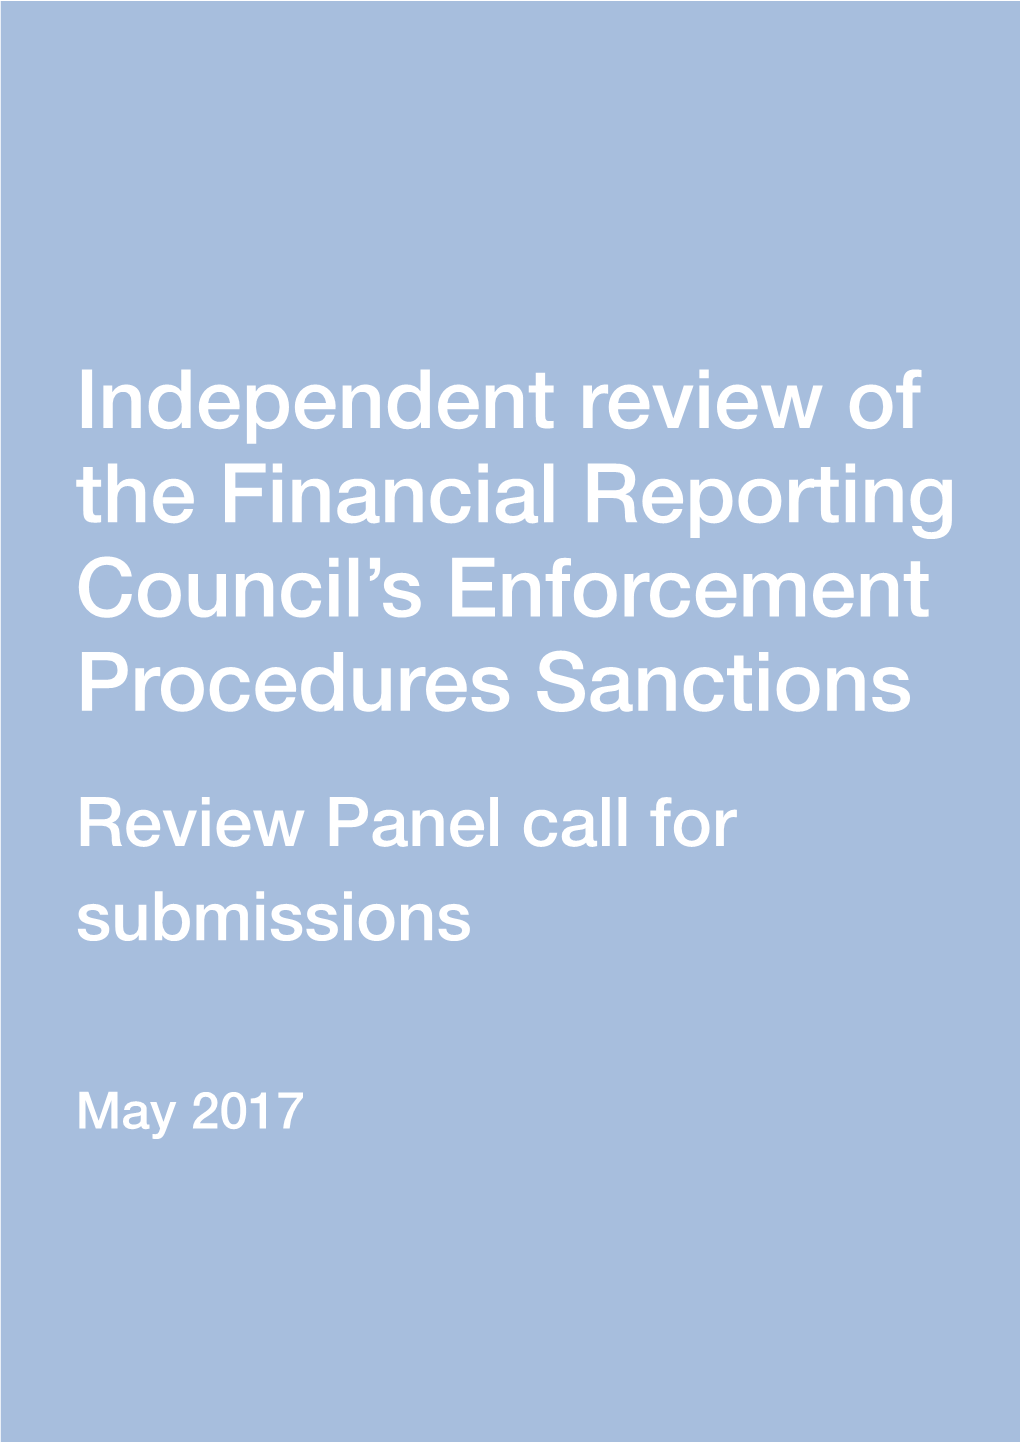 Independent Review of the Financial Reporting Council's Enforcement